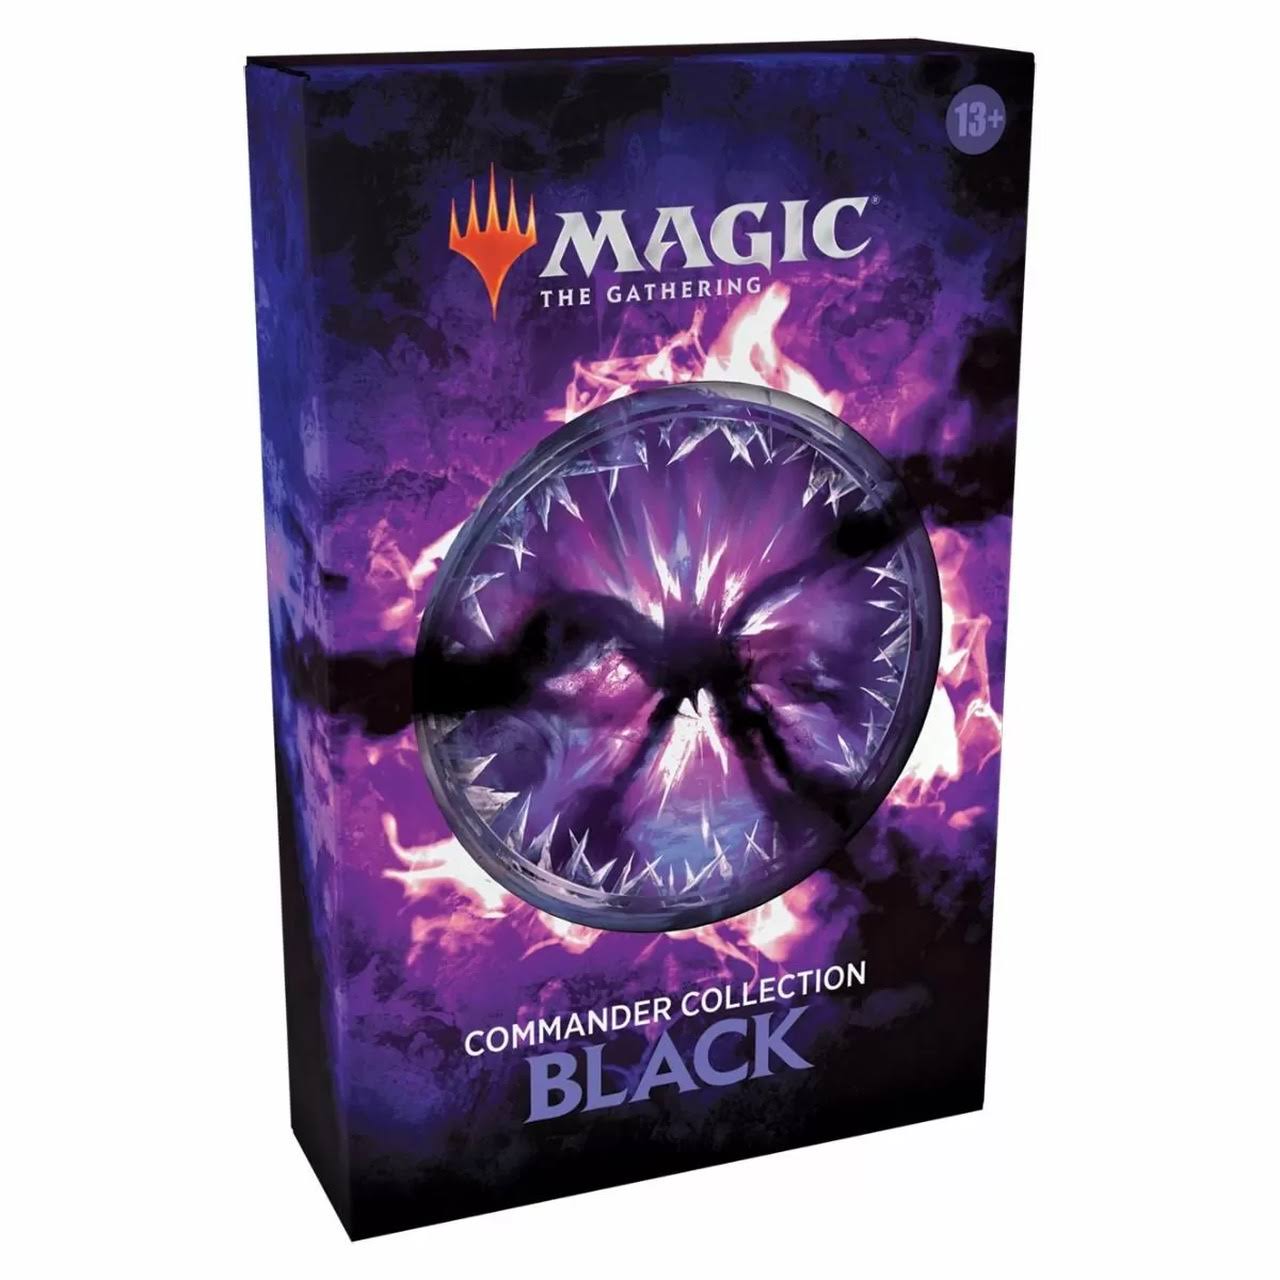 Magic The Gathering - Commander Collection Black